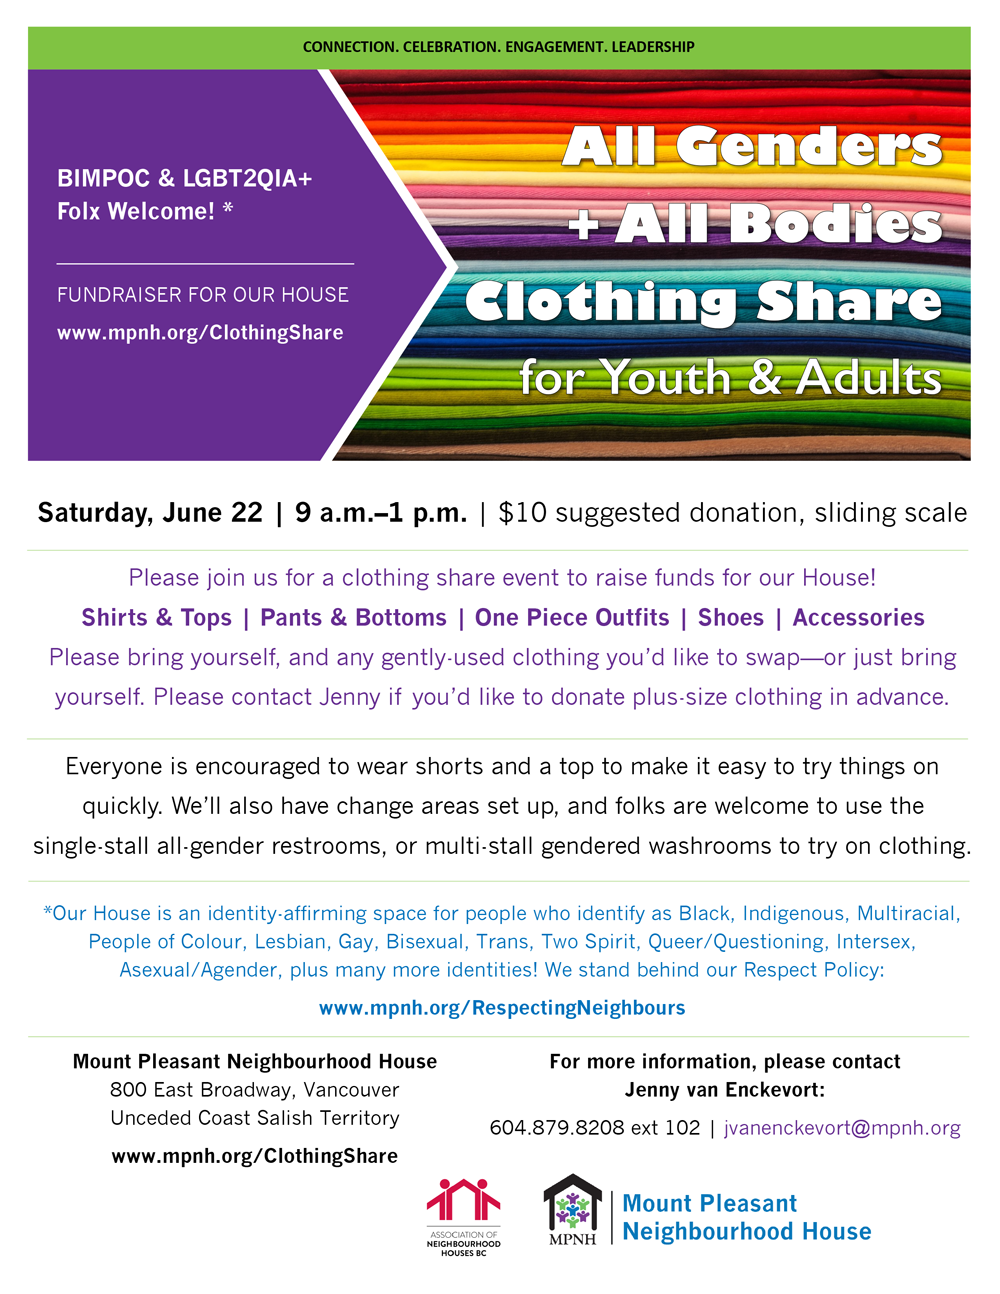 An image of the poster with event details, featuring a photo of a stack of folded fabrics in rainbow colours.